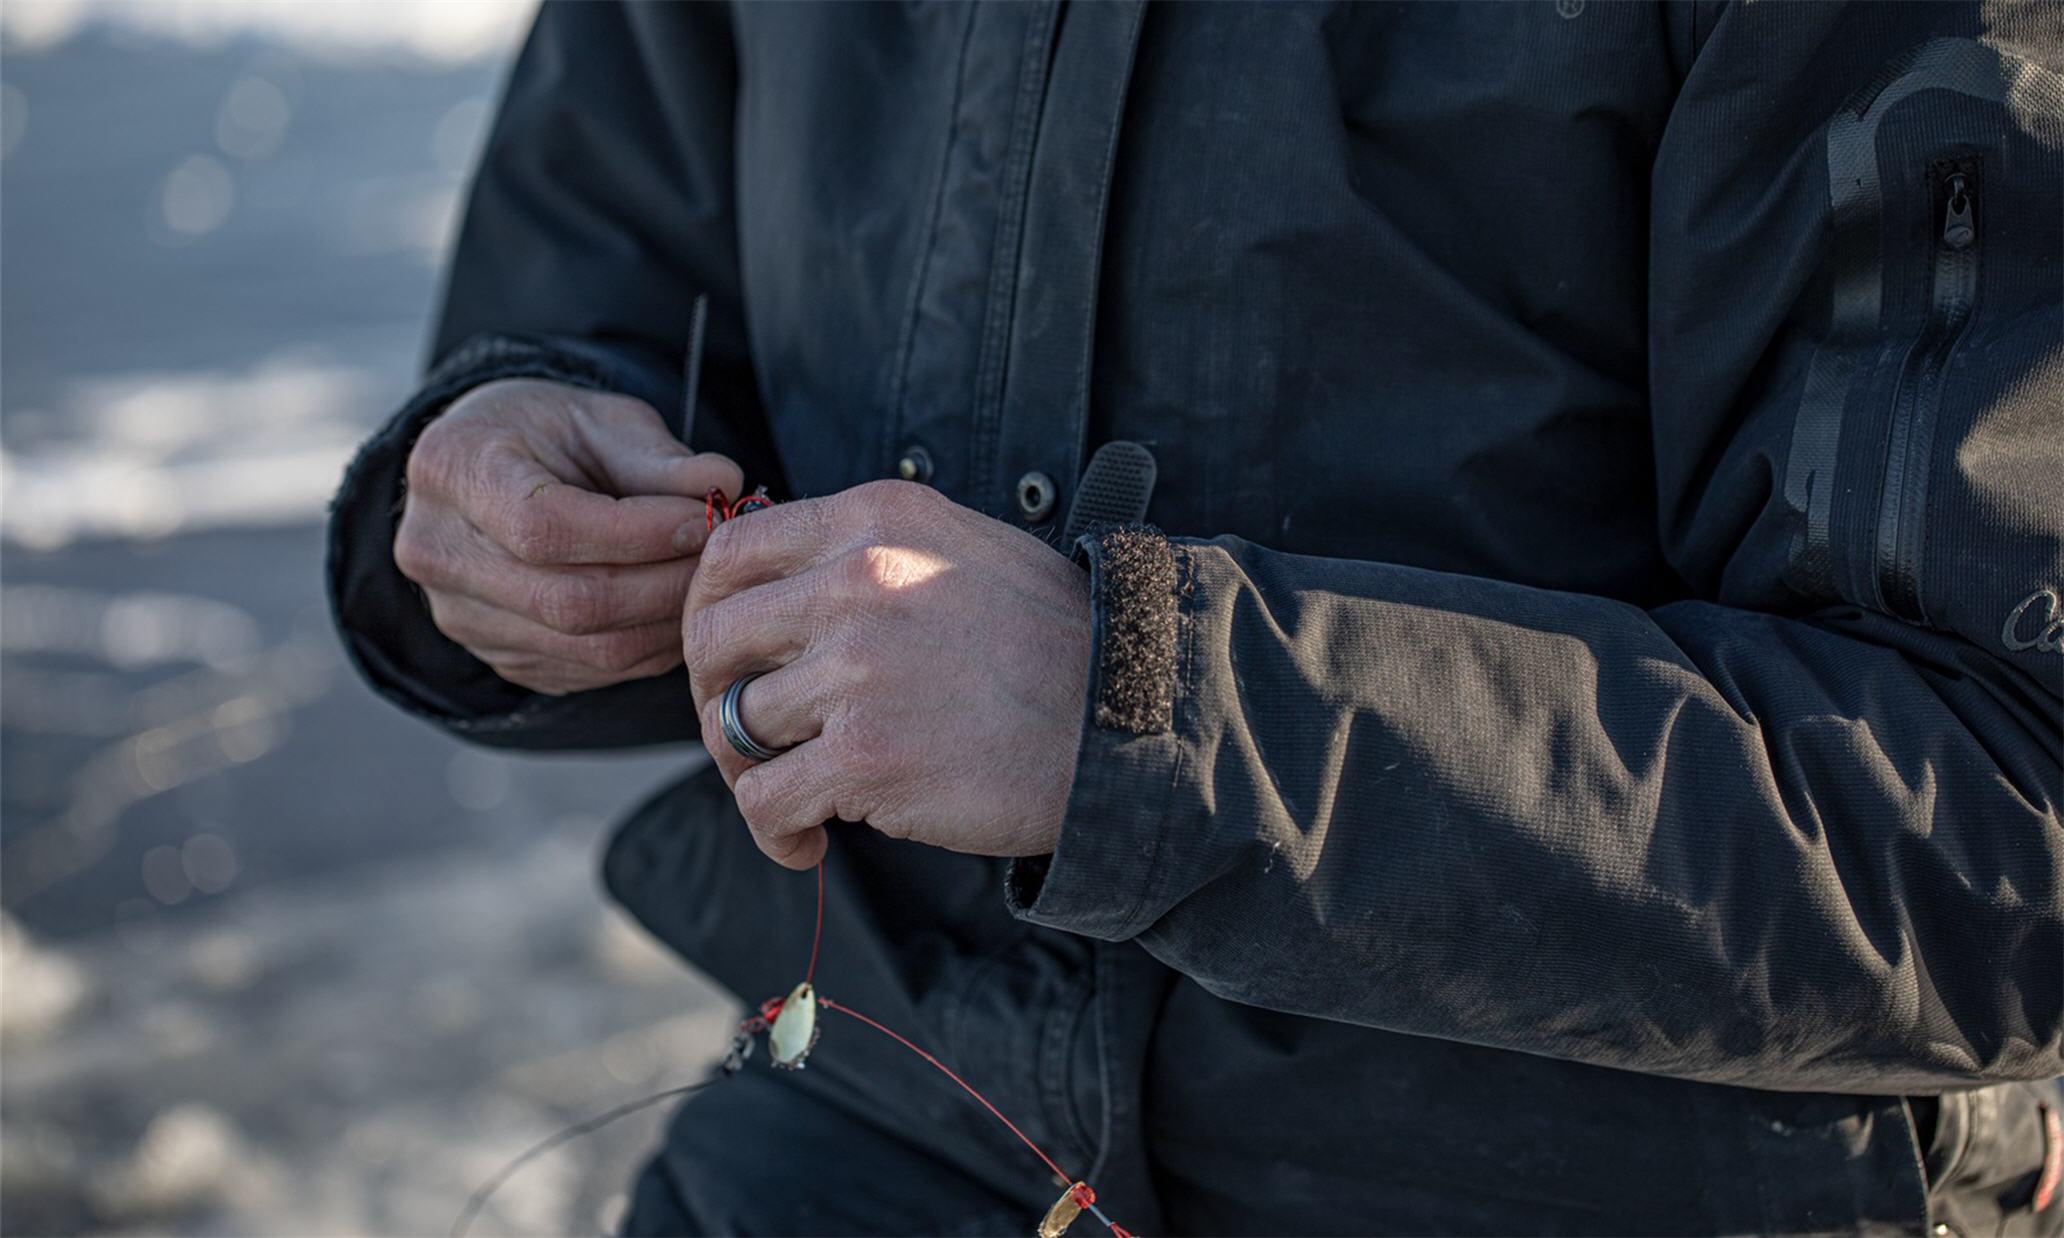 3 Pros Pick the Best Ice Fishing Line for You